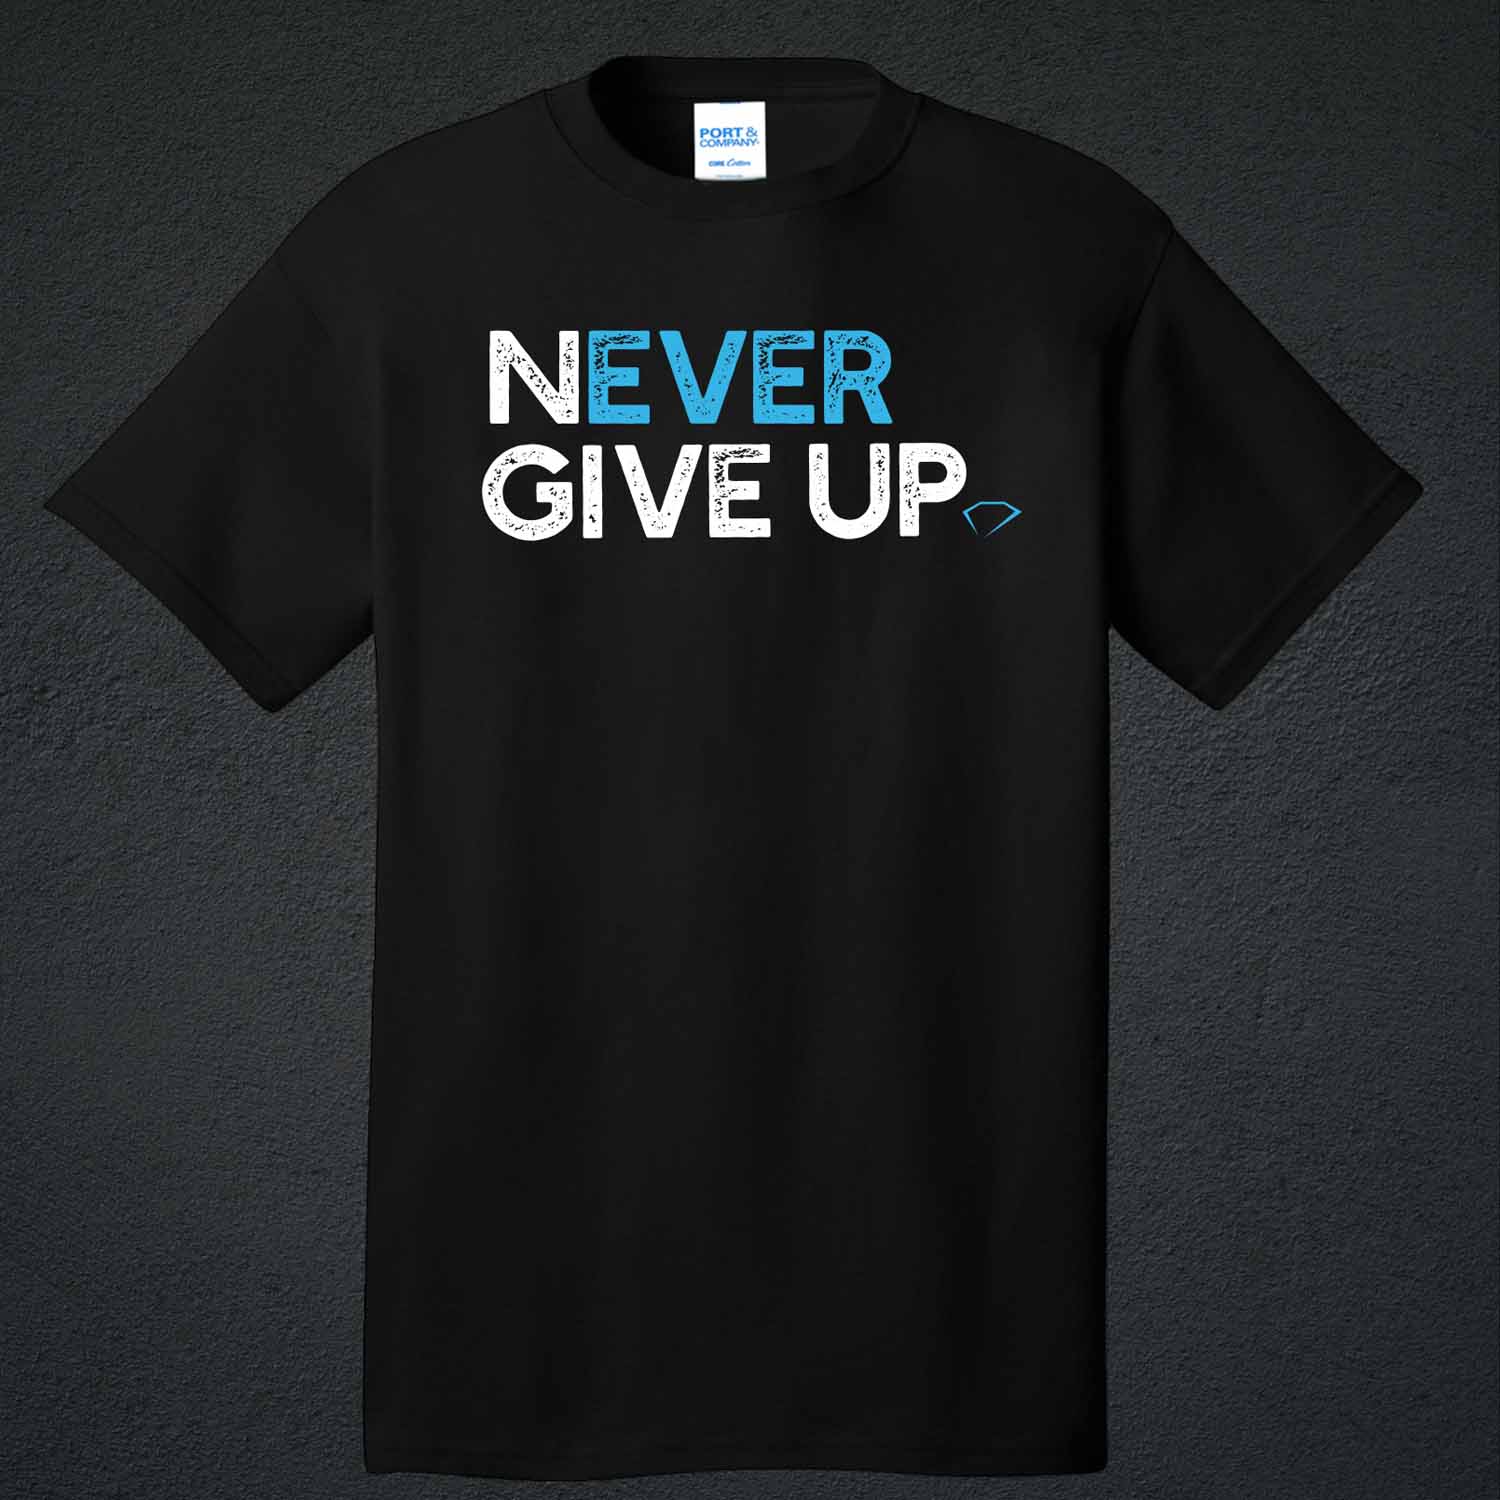 Never Give Up t-Shirt